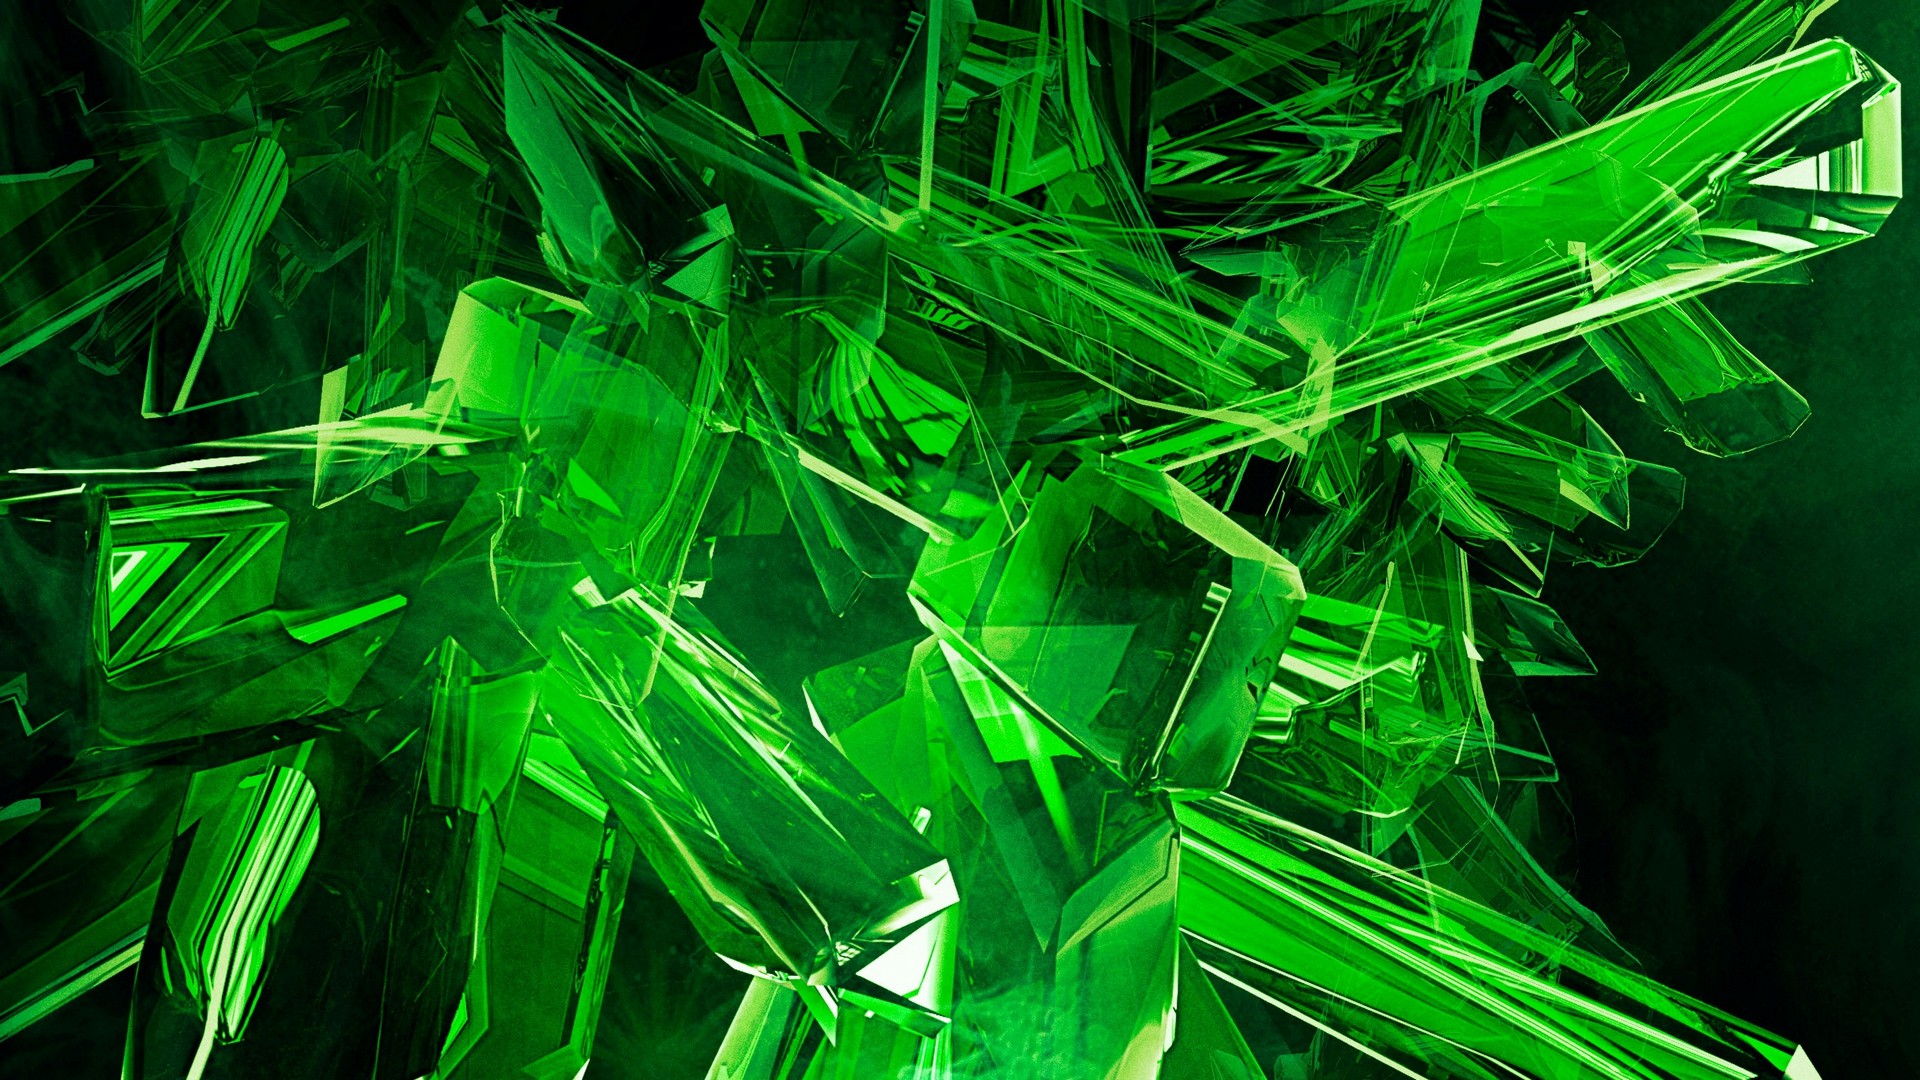 Desktop Wallpaper Neon Green with image resolution 1920x1080 pixel. You can use this wallpaper as background for your desktop Computer Screensavers, Android or iPhone smartphones